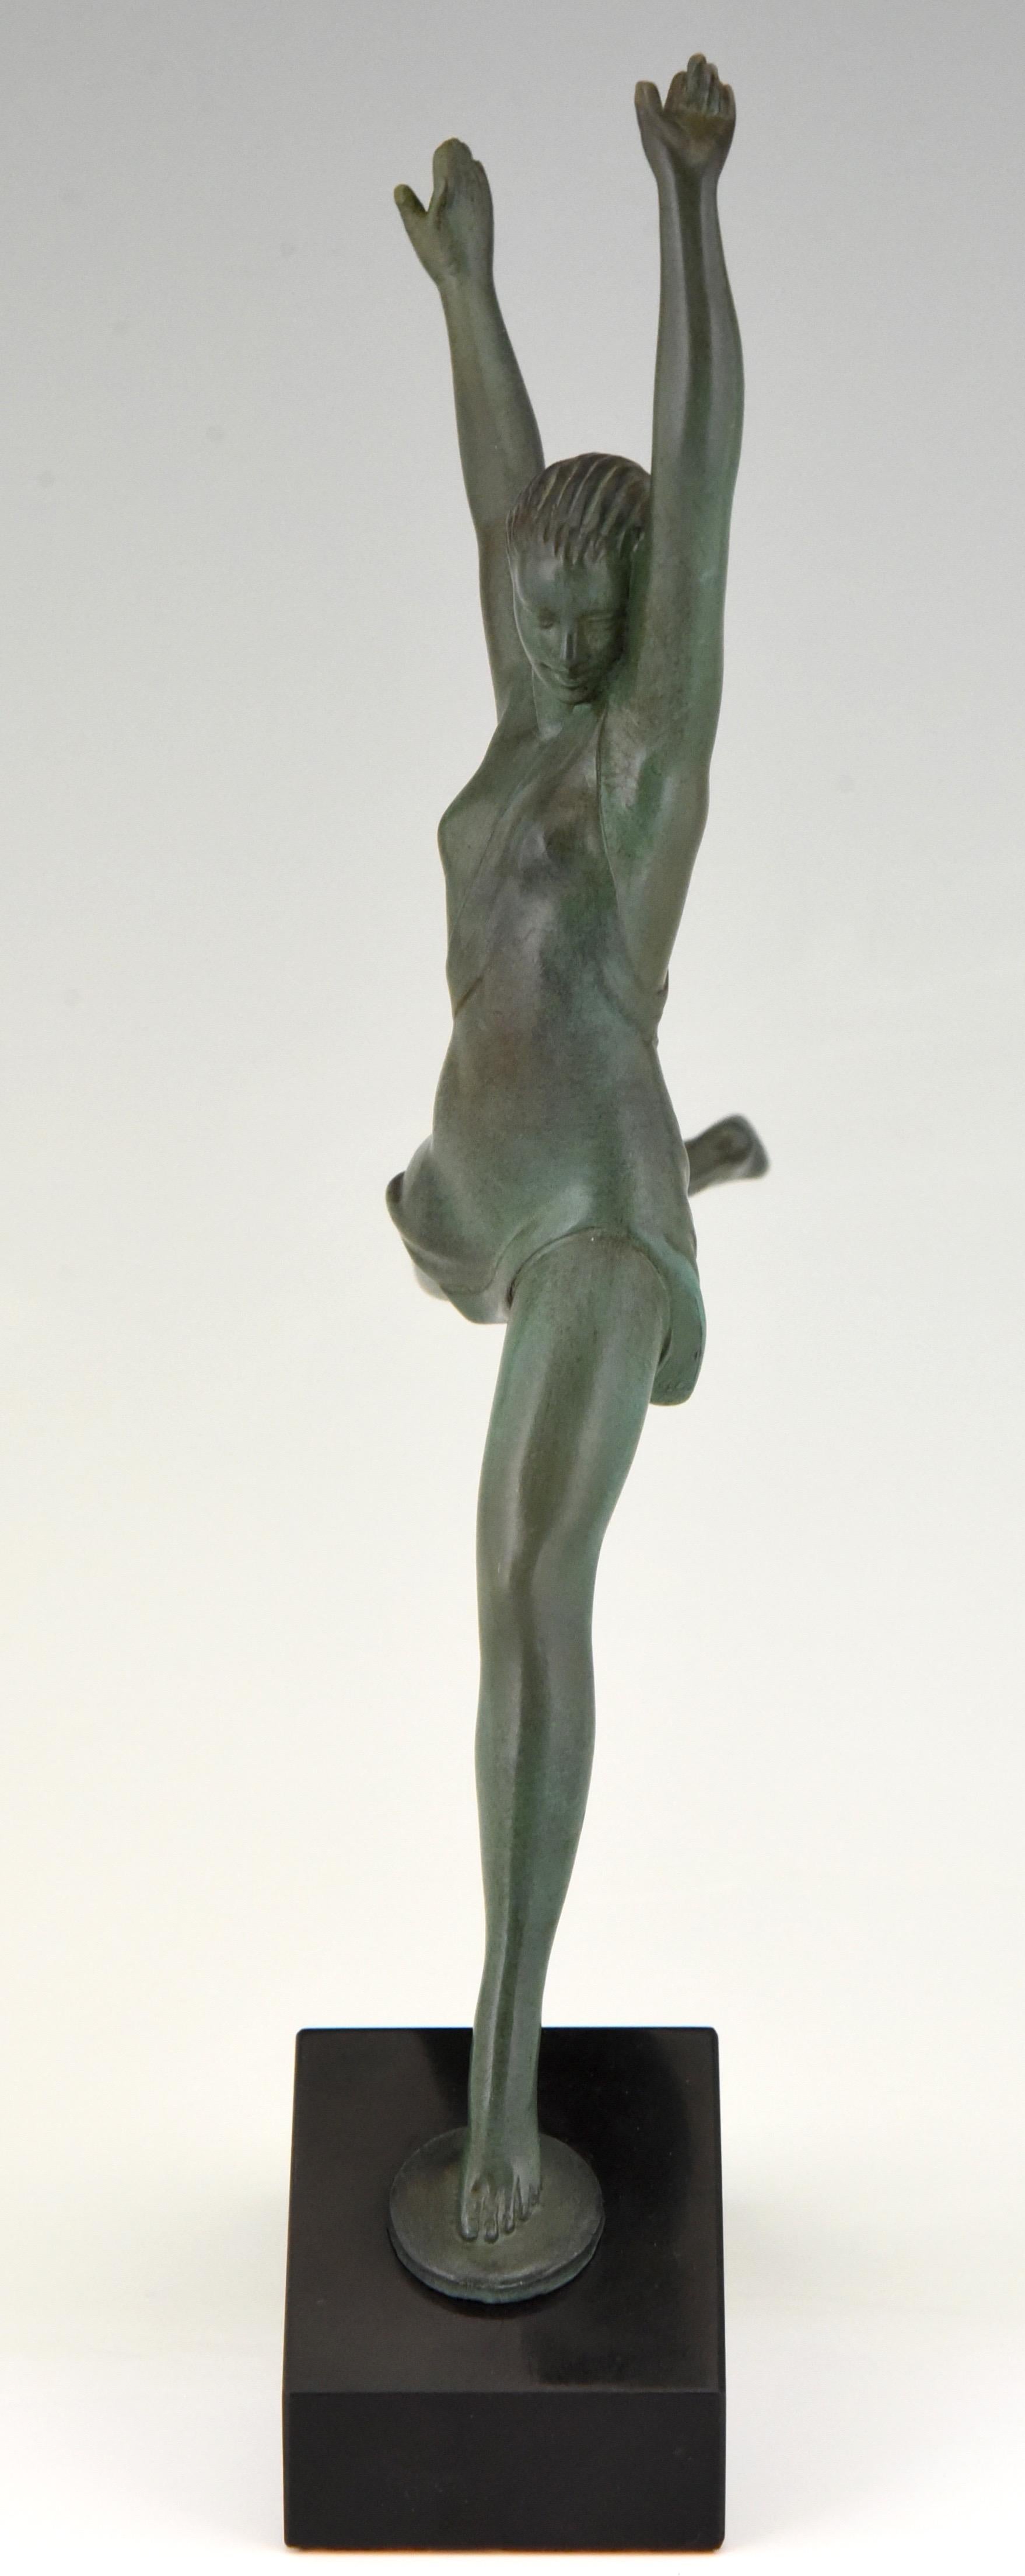 Patinated Olympe Art Deco Sculpture Running Woman Fayral Pierre Le Faguays, France, 1930